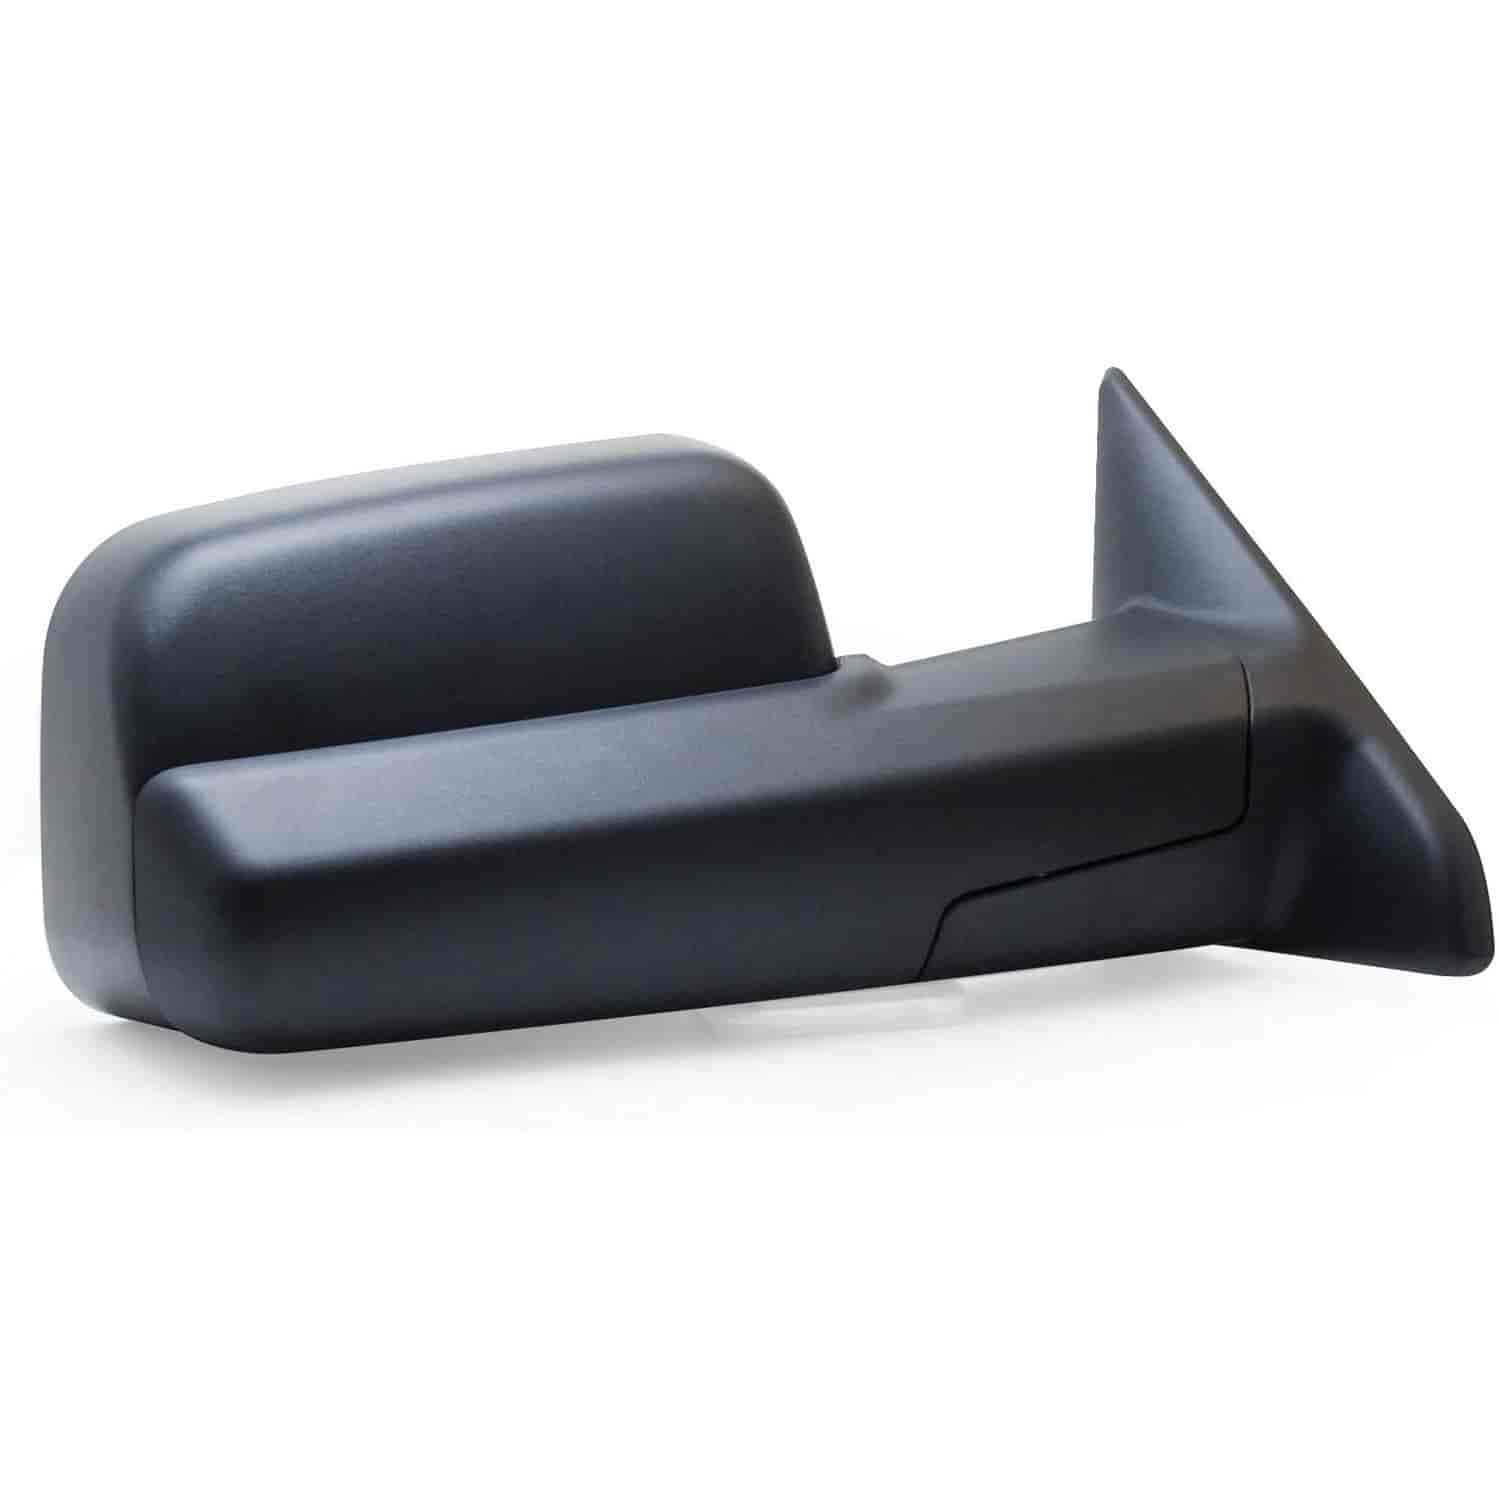 OEM Style Replacement mirror for 09-13 Dodge/ Ram